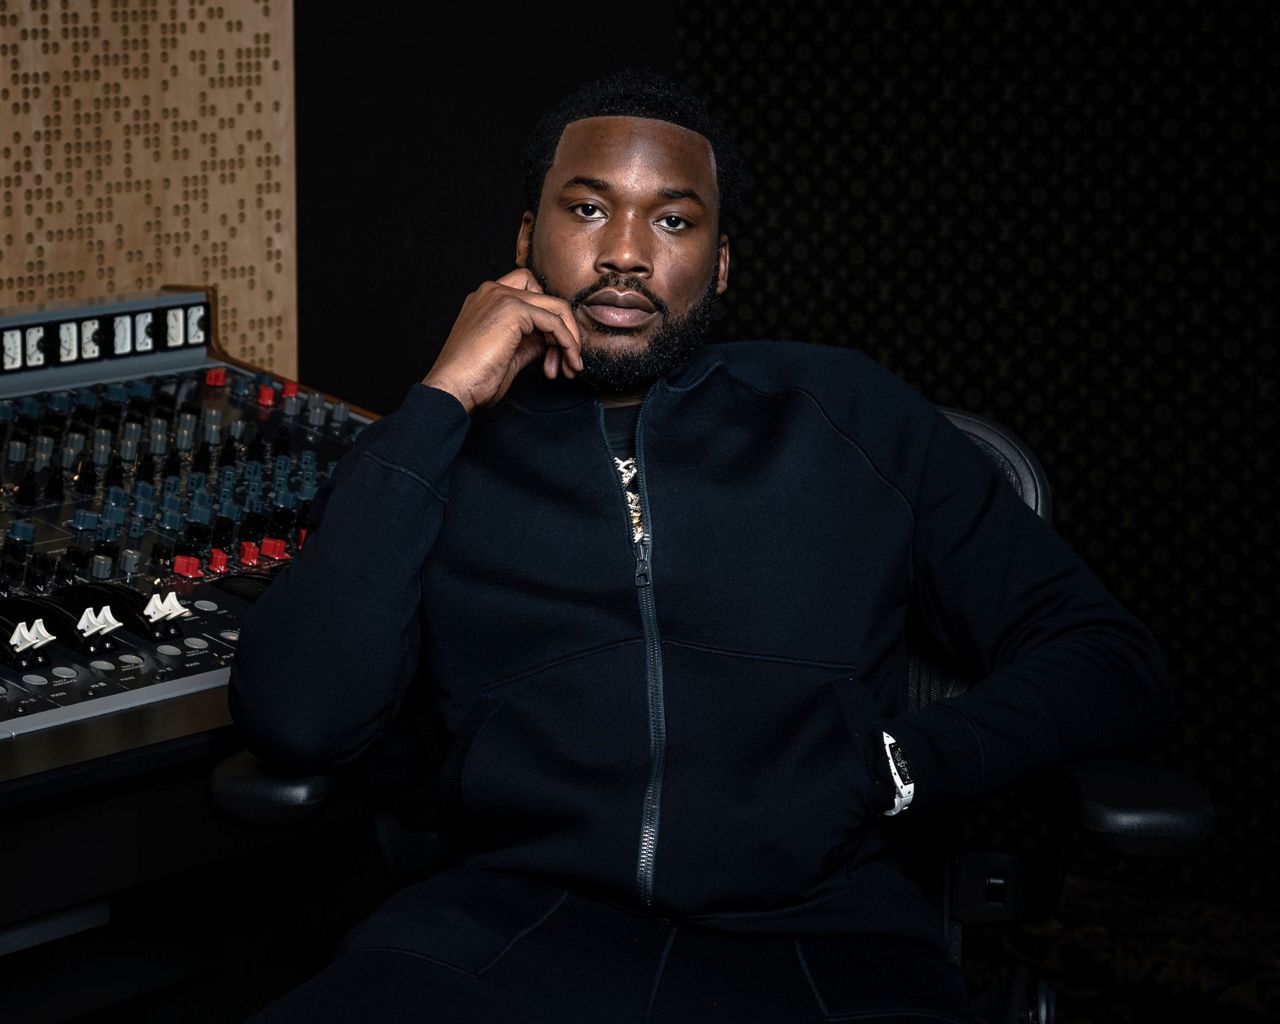 With ‘Championships,’ Meek Mill might become a Grammy champ